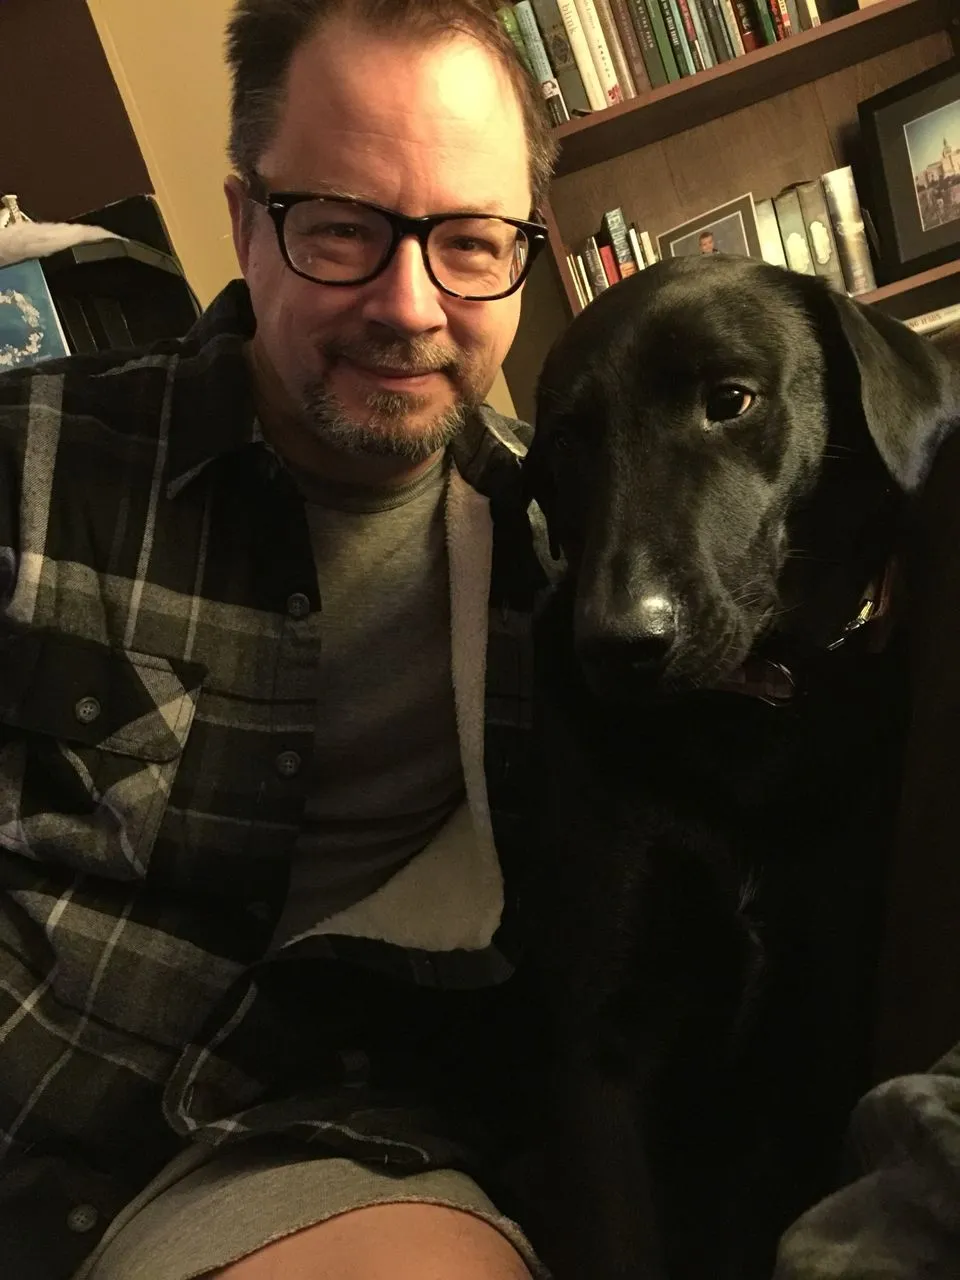 Jeff Oaks, whtie man with glasses and beard, and his dog Andy/Photo by Michael Rusnak